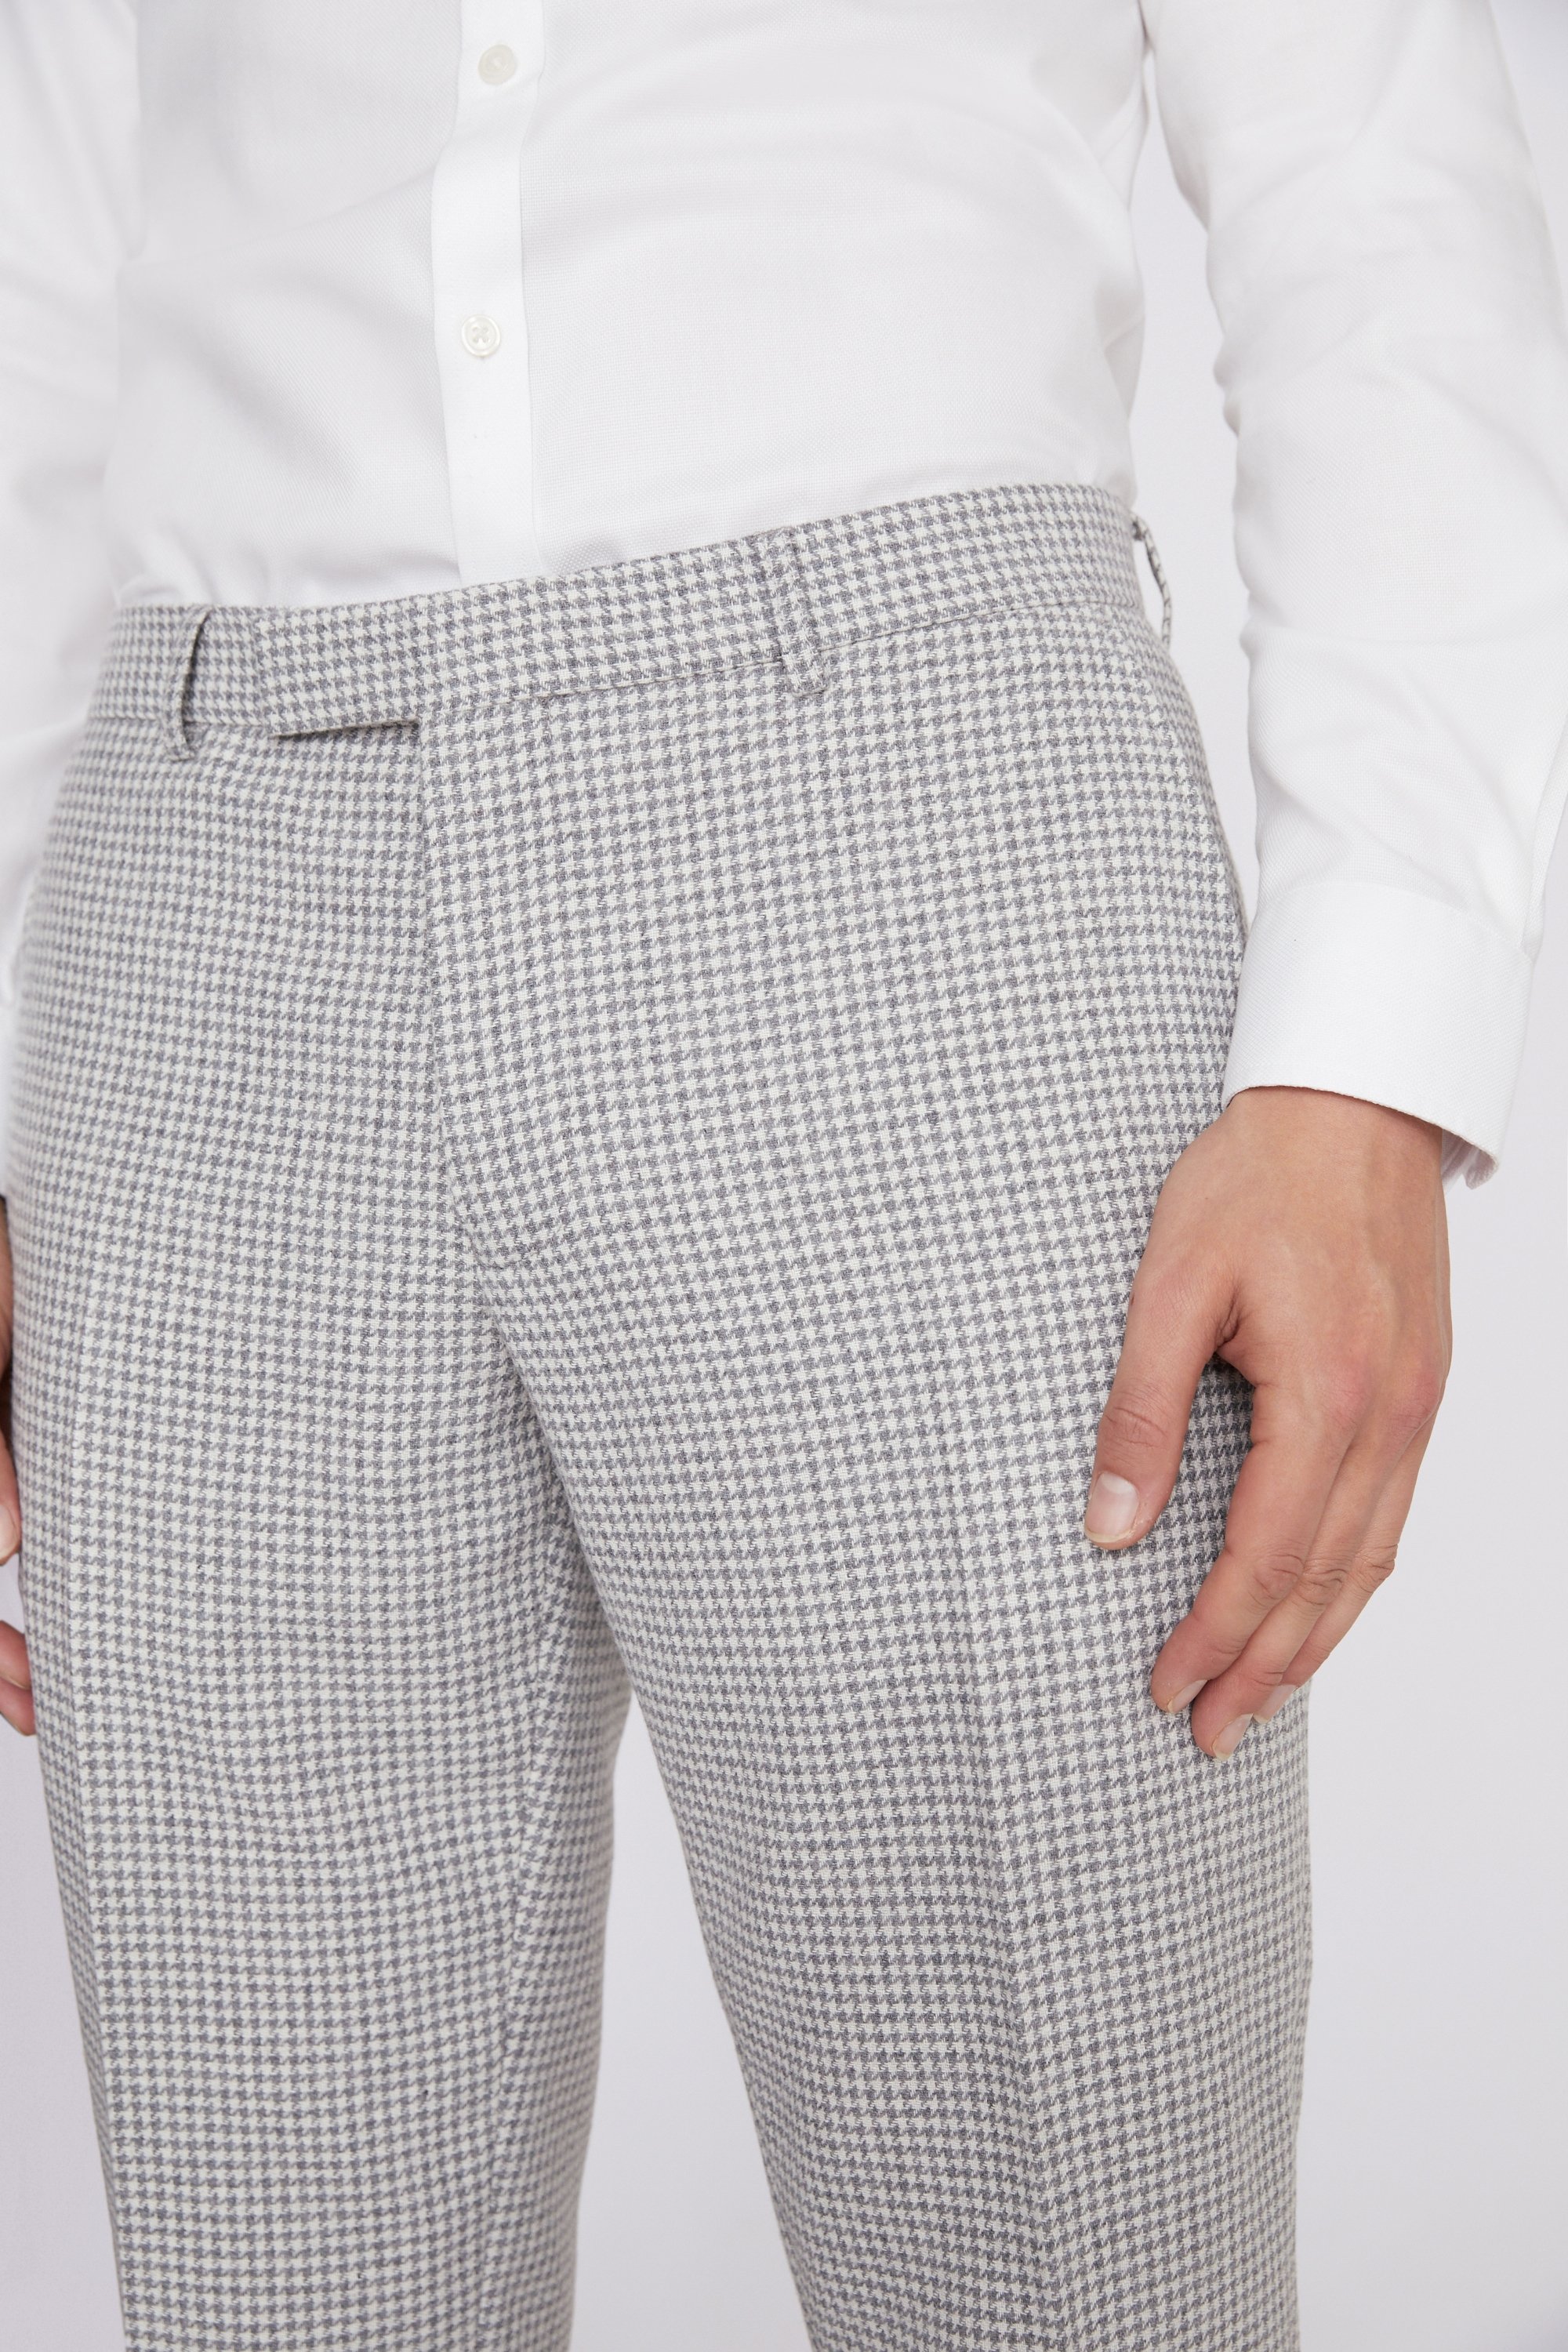 Charcoal Houndstooth Trousers | Buy Online at Moss